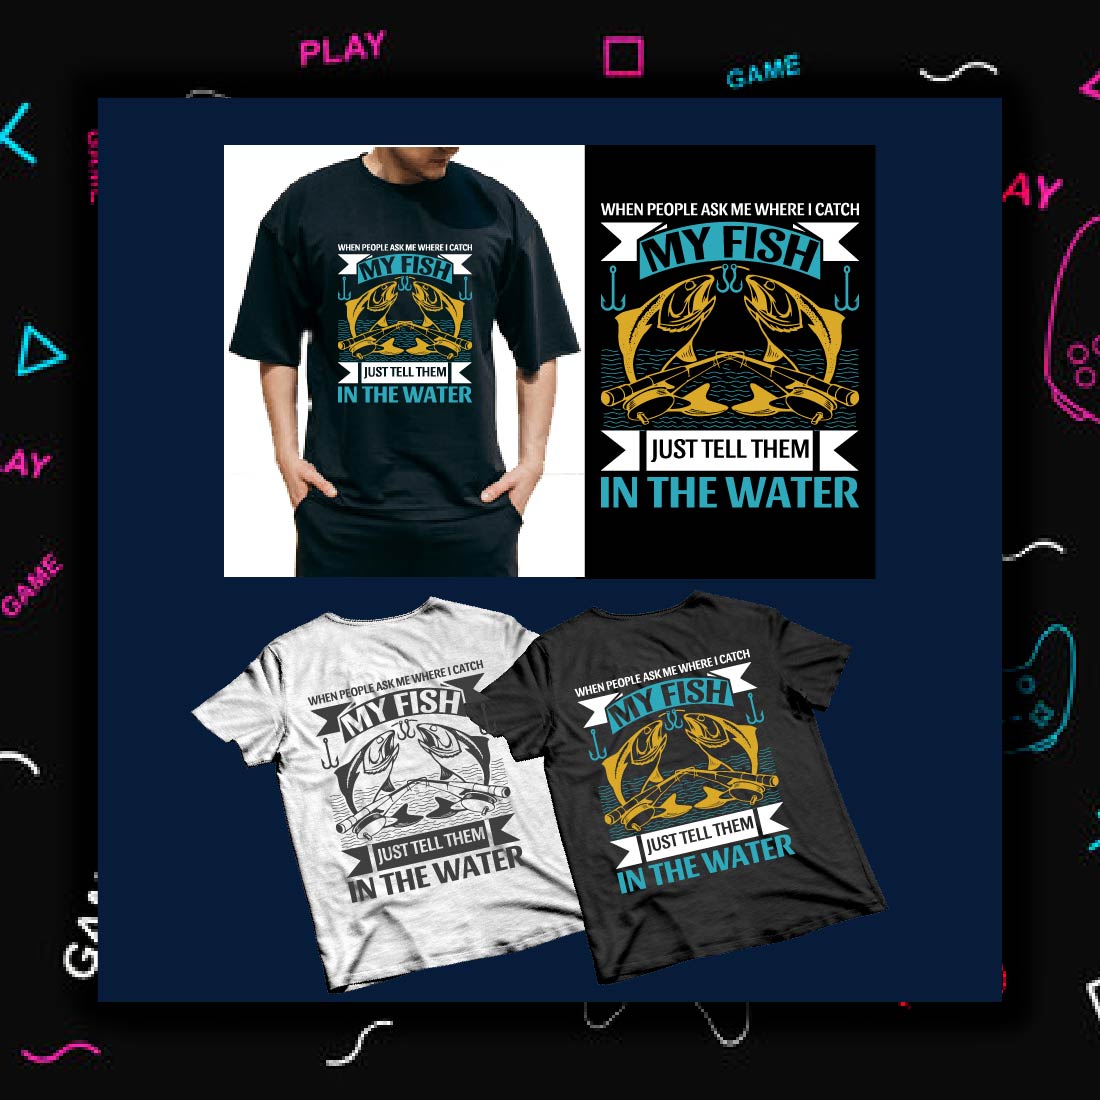 A selection of images of t-shirts with enchanting prints on the theme of fishing.